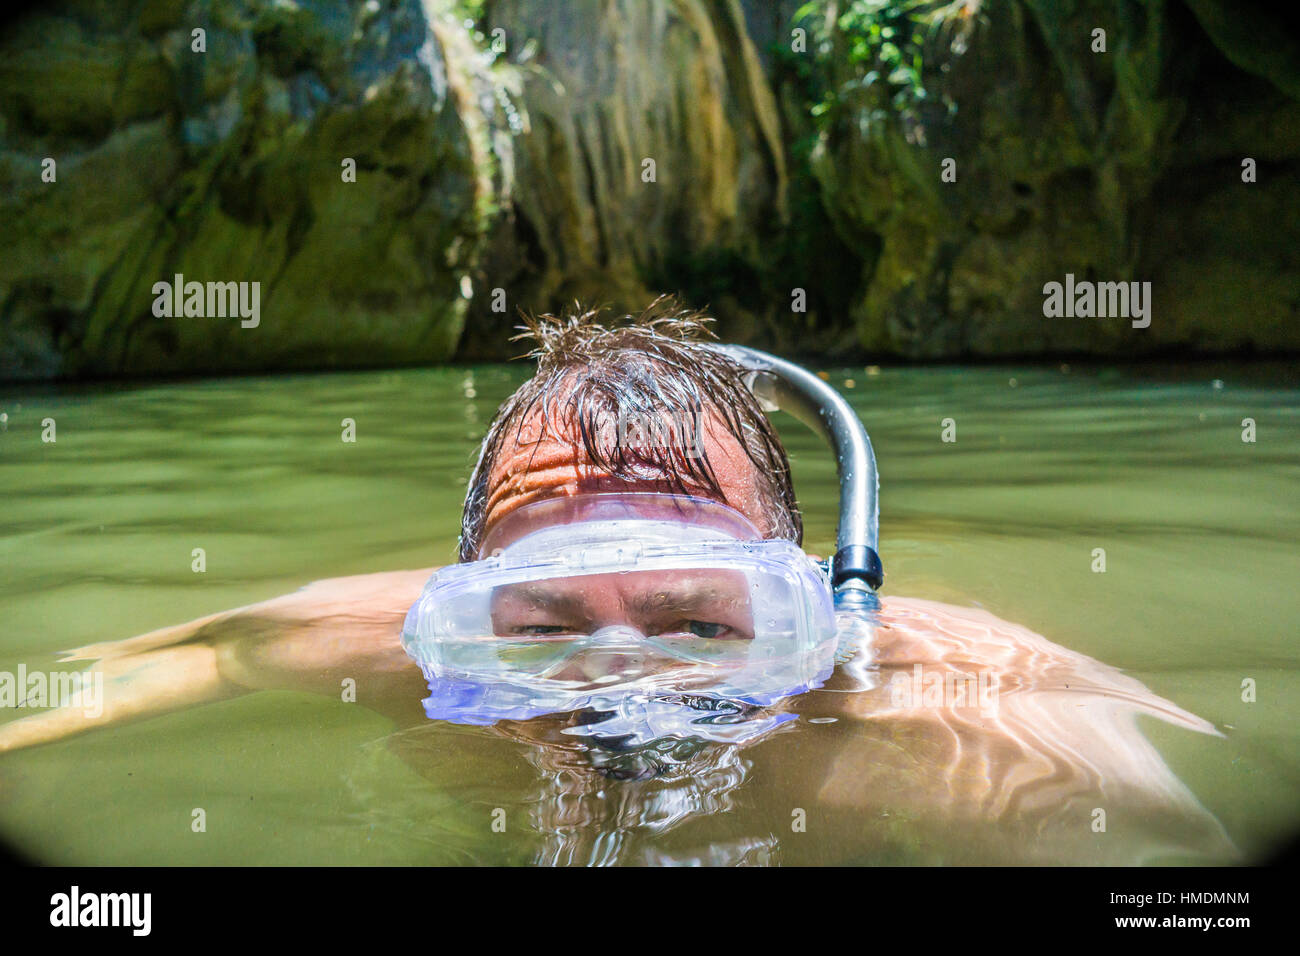 A middle-aged man snorkelling in a natural pool Stock Photo